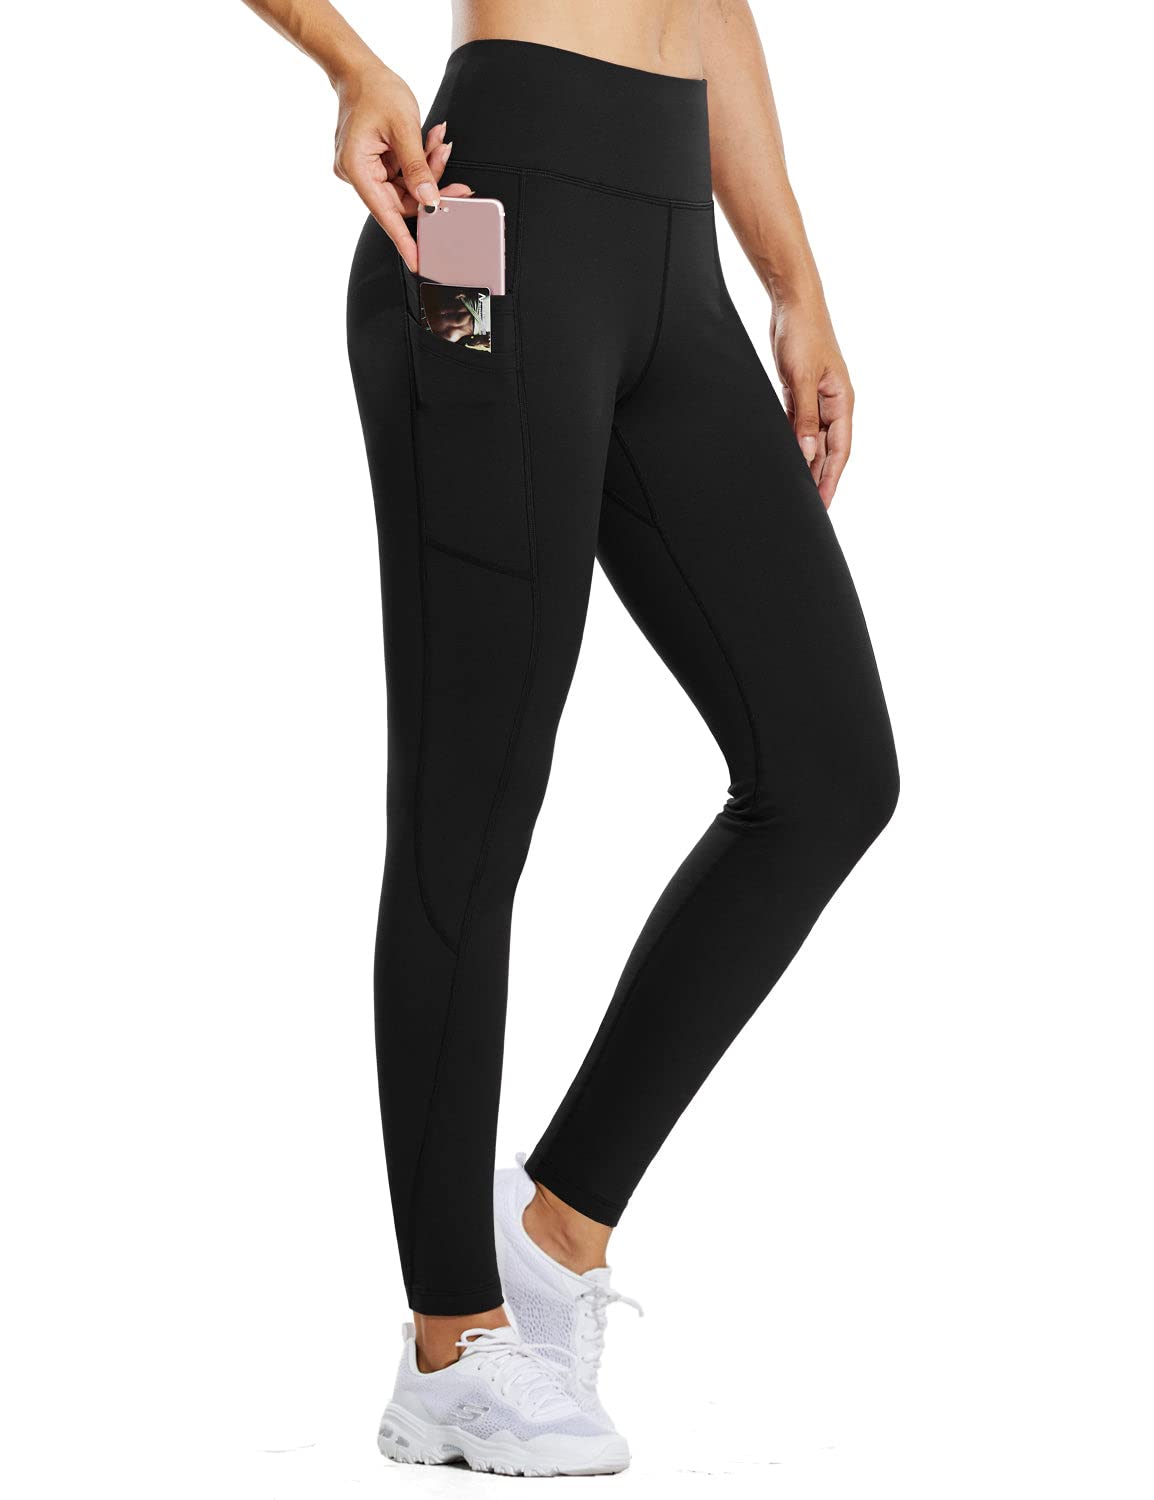 Women's Fleece Lined Leggings High Waisted Workout Yoga Pants with Pockets  